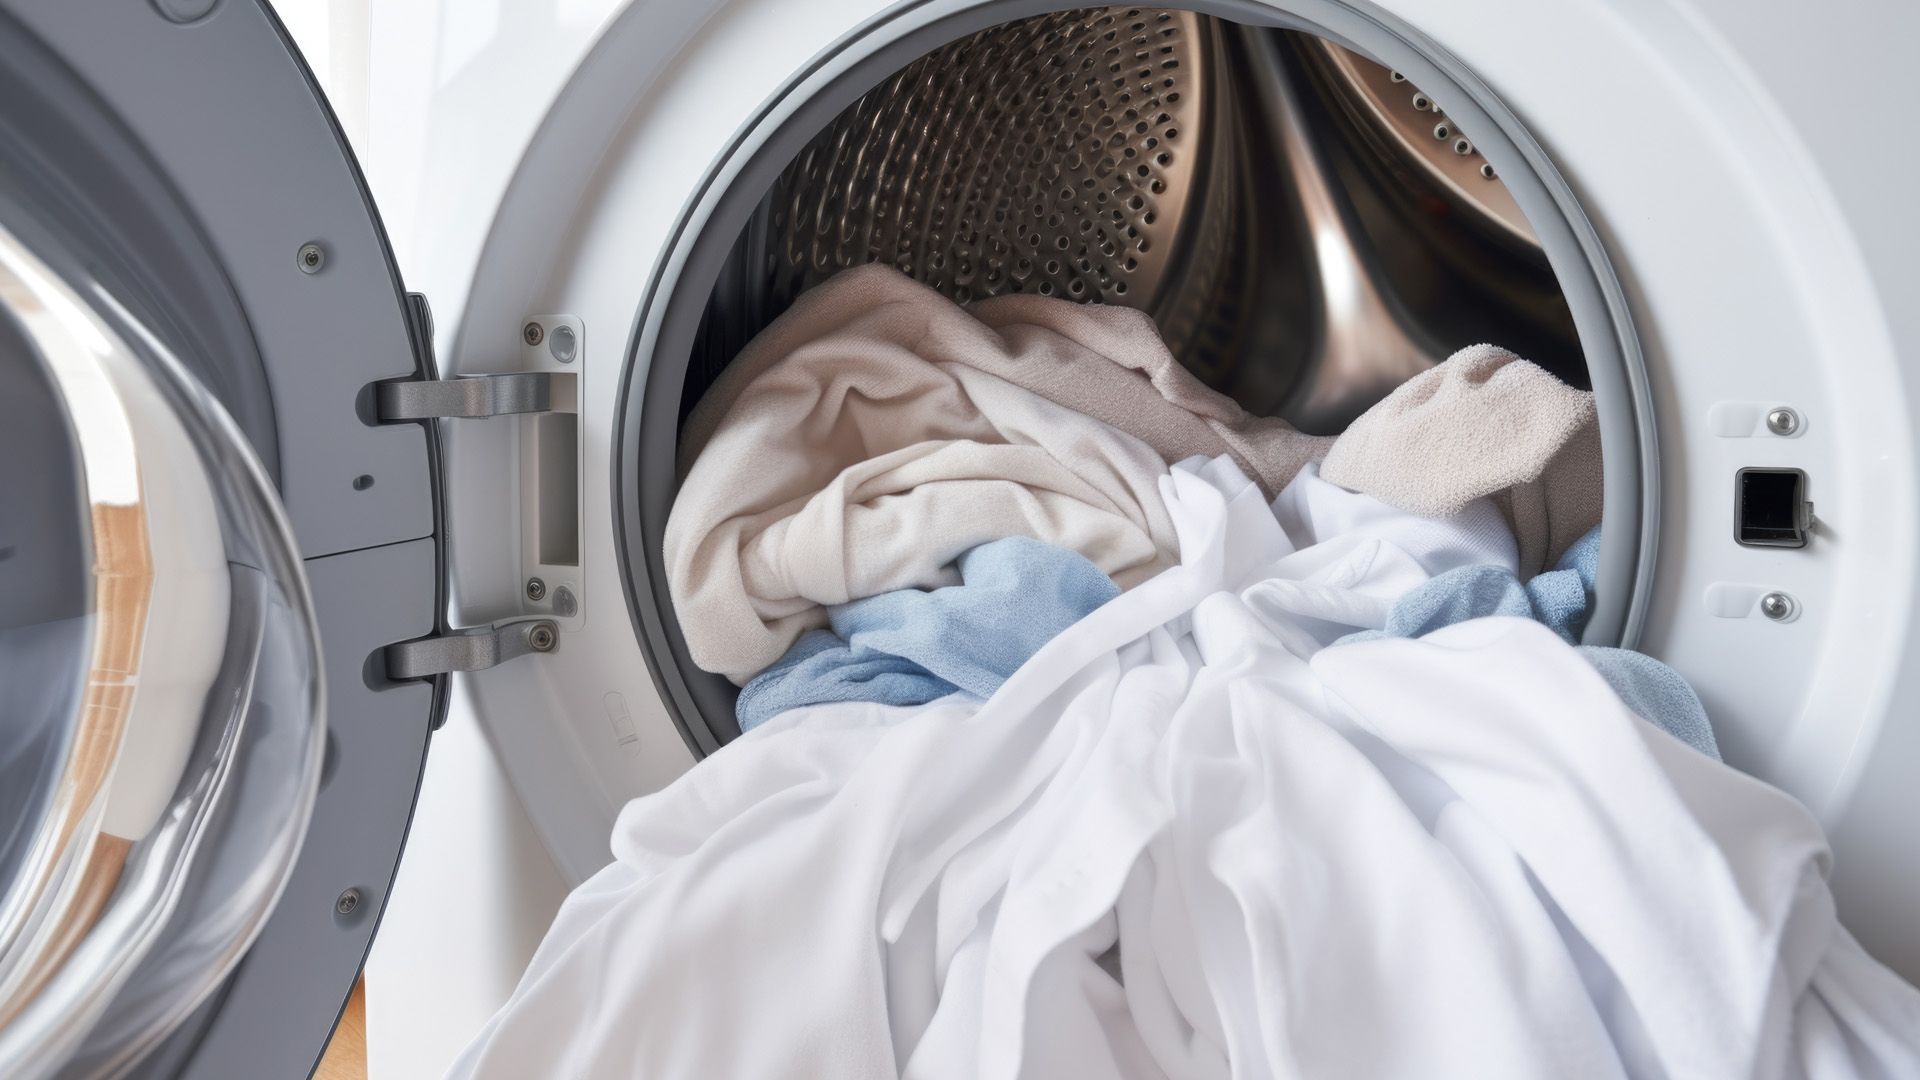 This is why you should never wash bed linen with towels